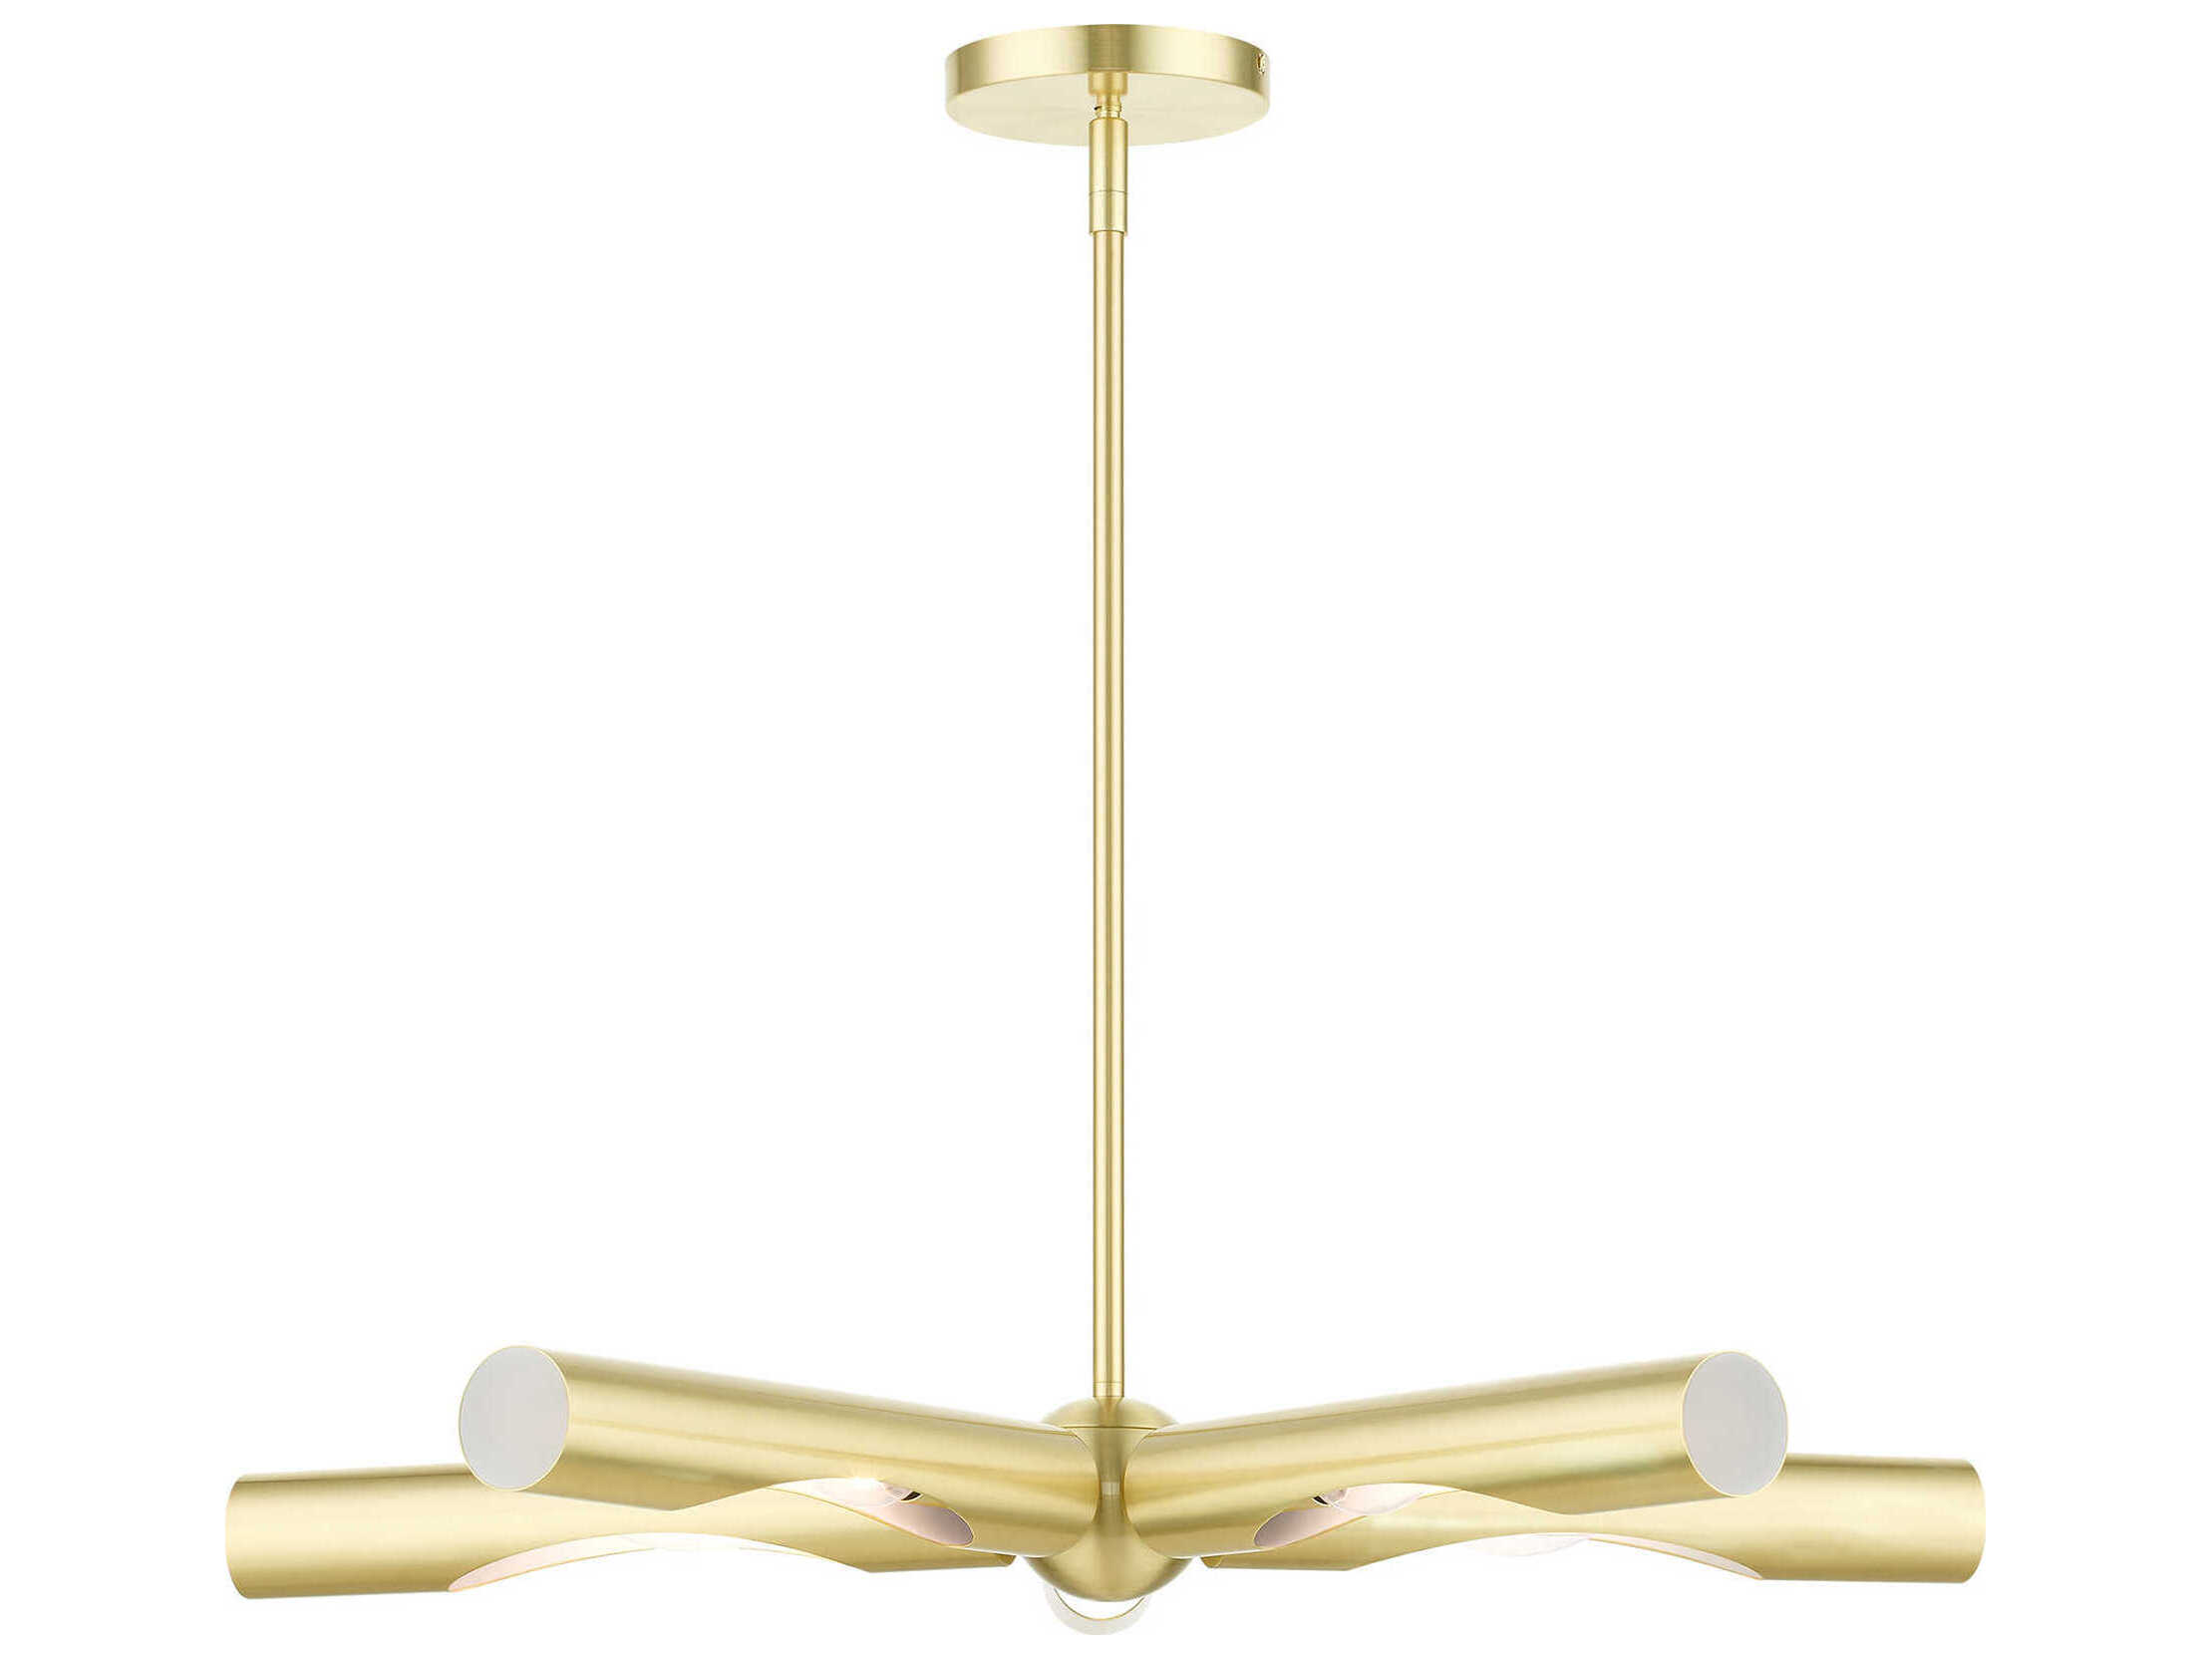 Livex Lighting 45915-12 Acra Satin Brass Finish with Hand Welded Satin Brass Shade 5 Light Chandelier in Acra Style 28 Inches Wide by 12 Inches high 